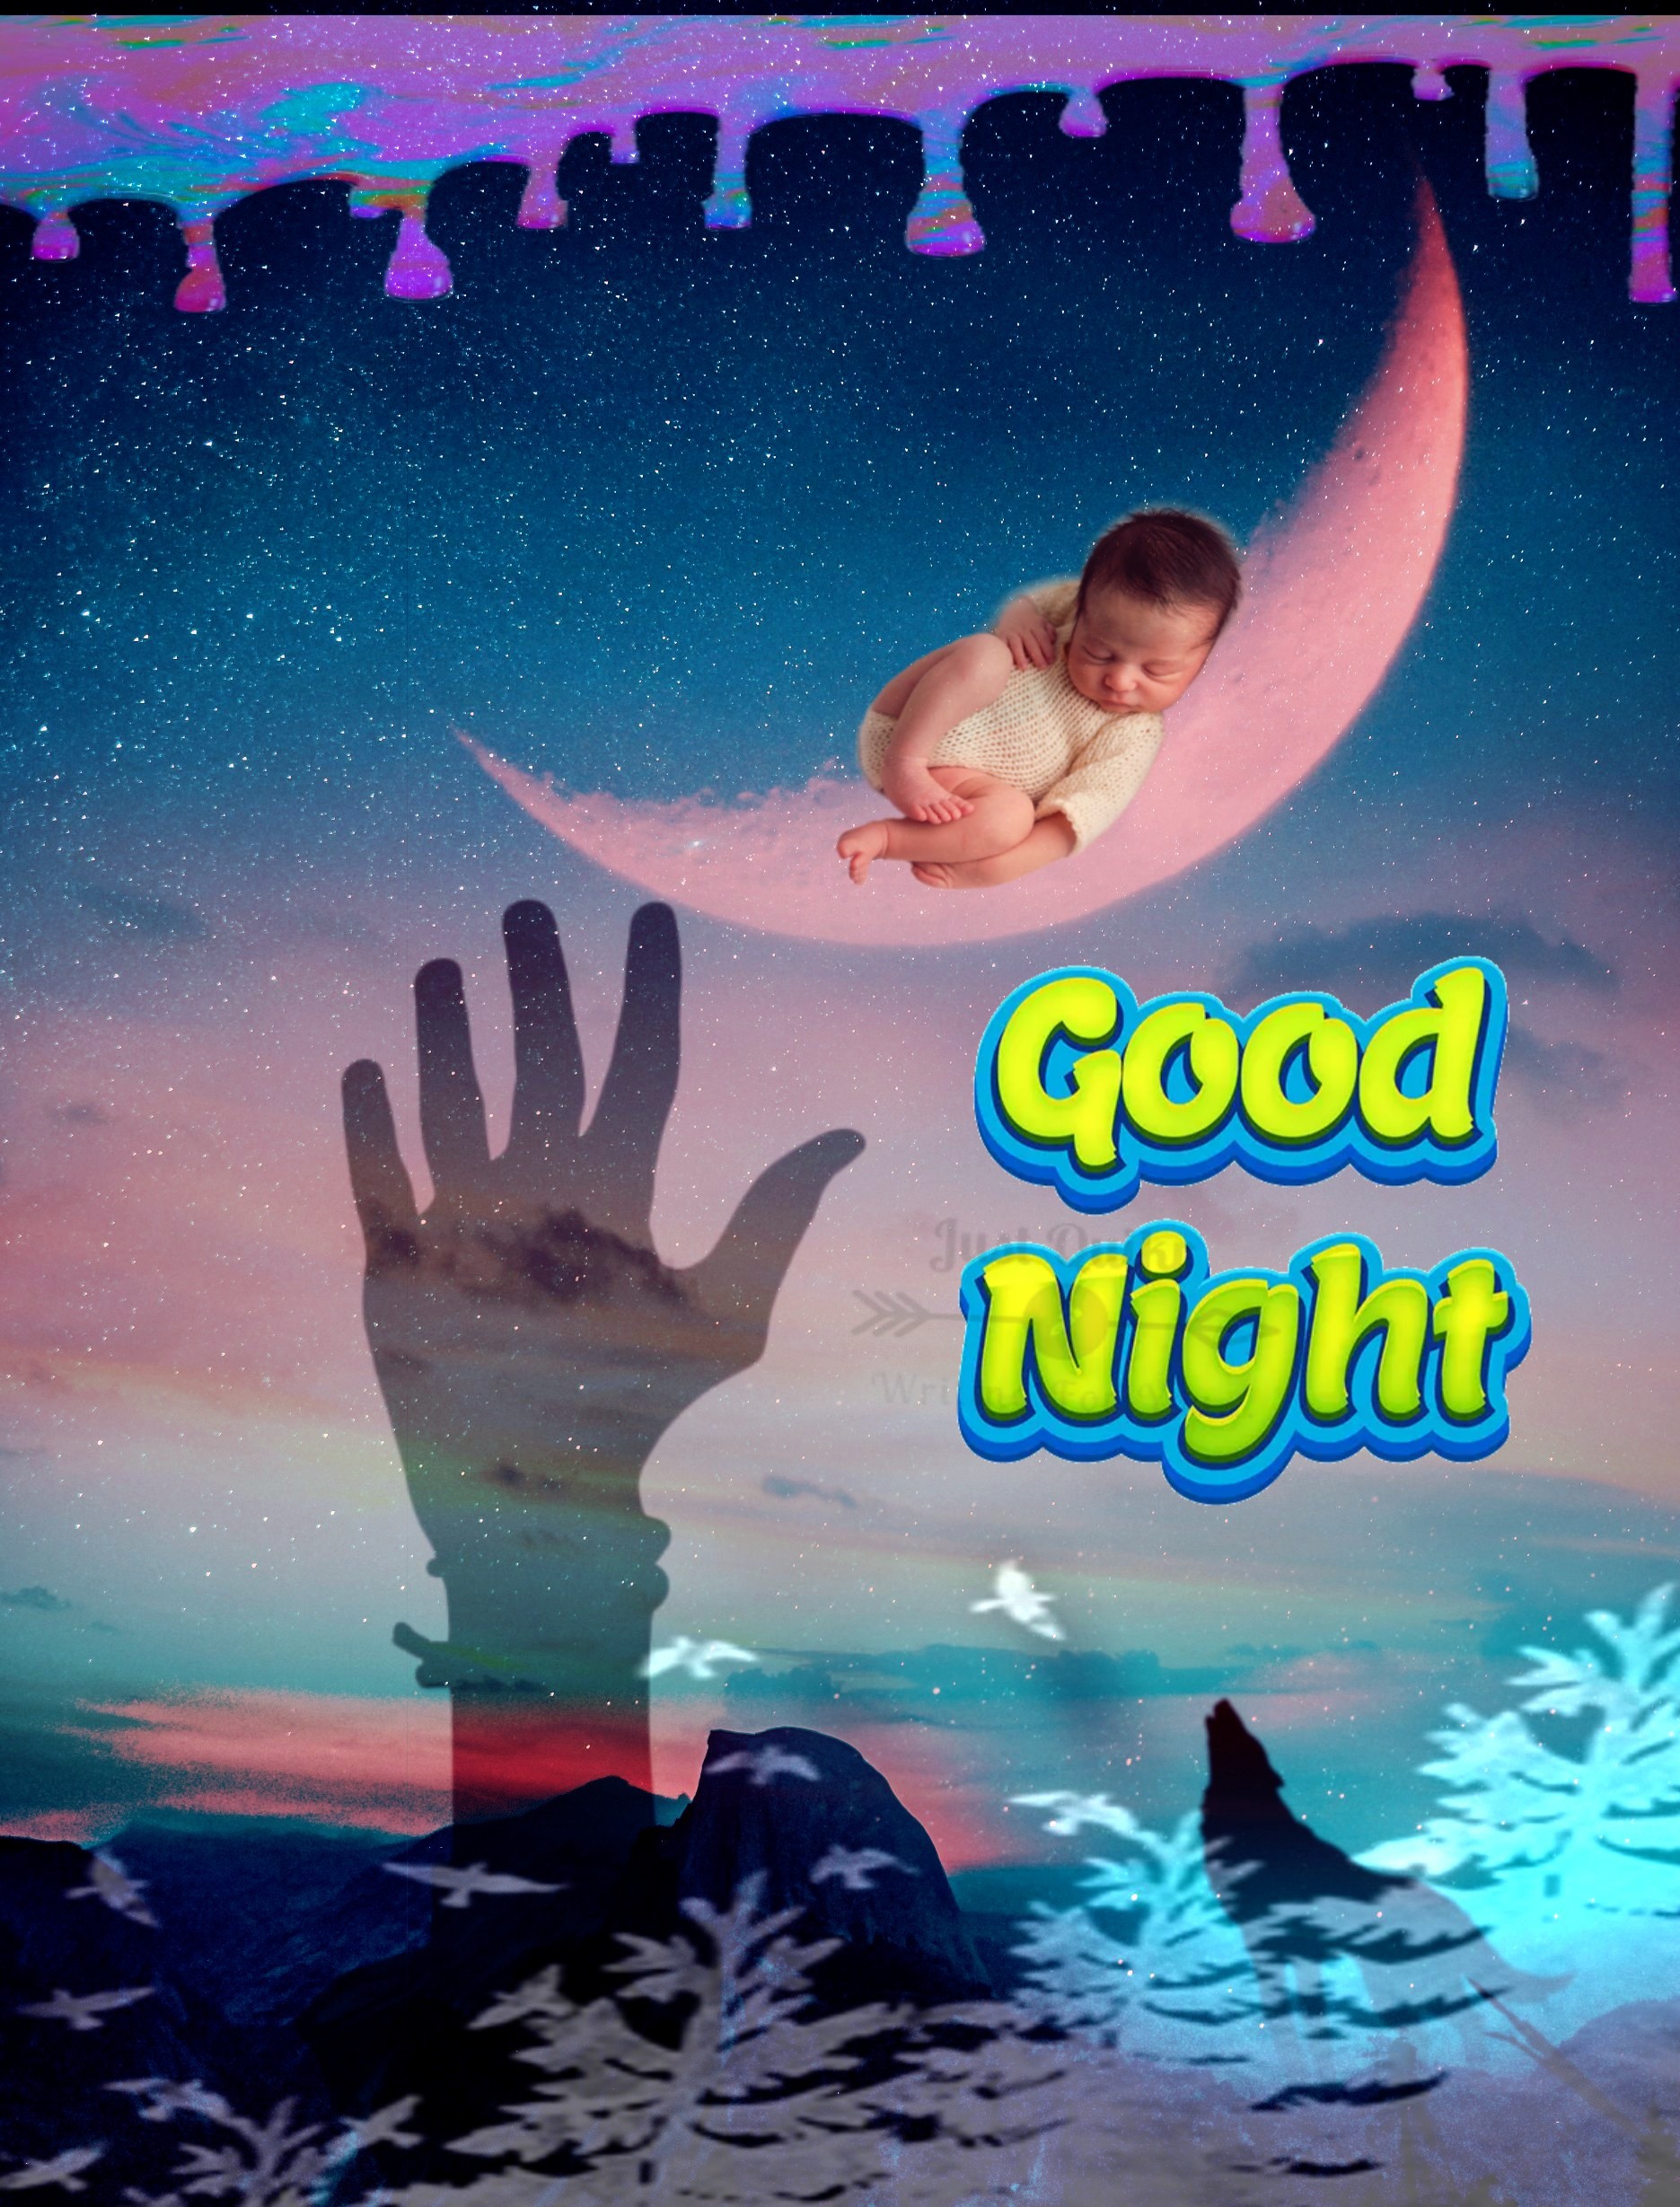 Top 10 : Good Night HD Pics Images For Baby